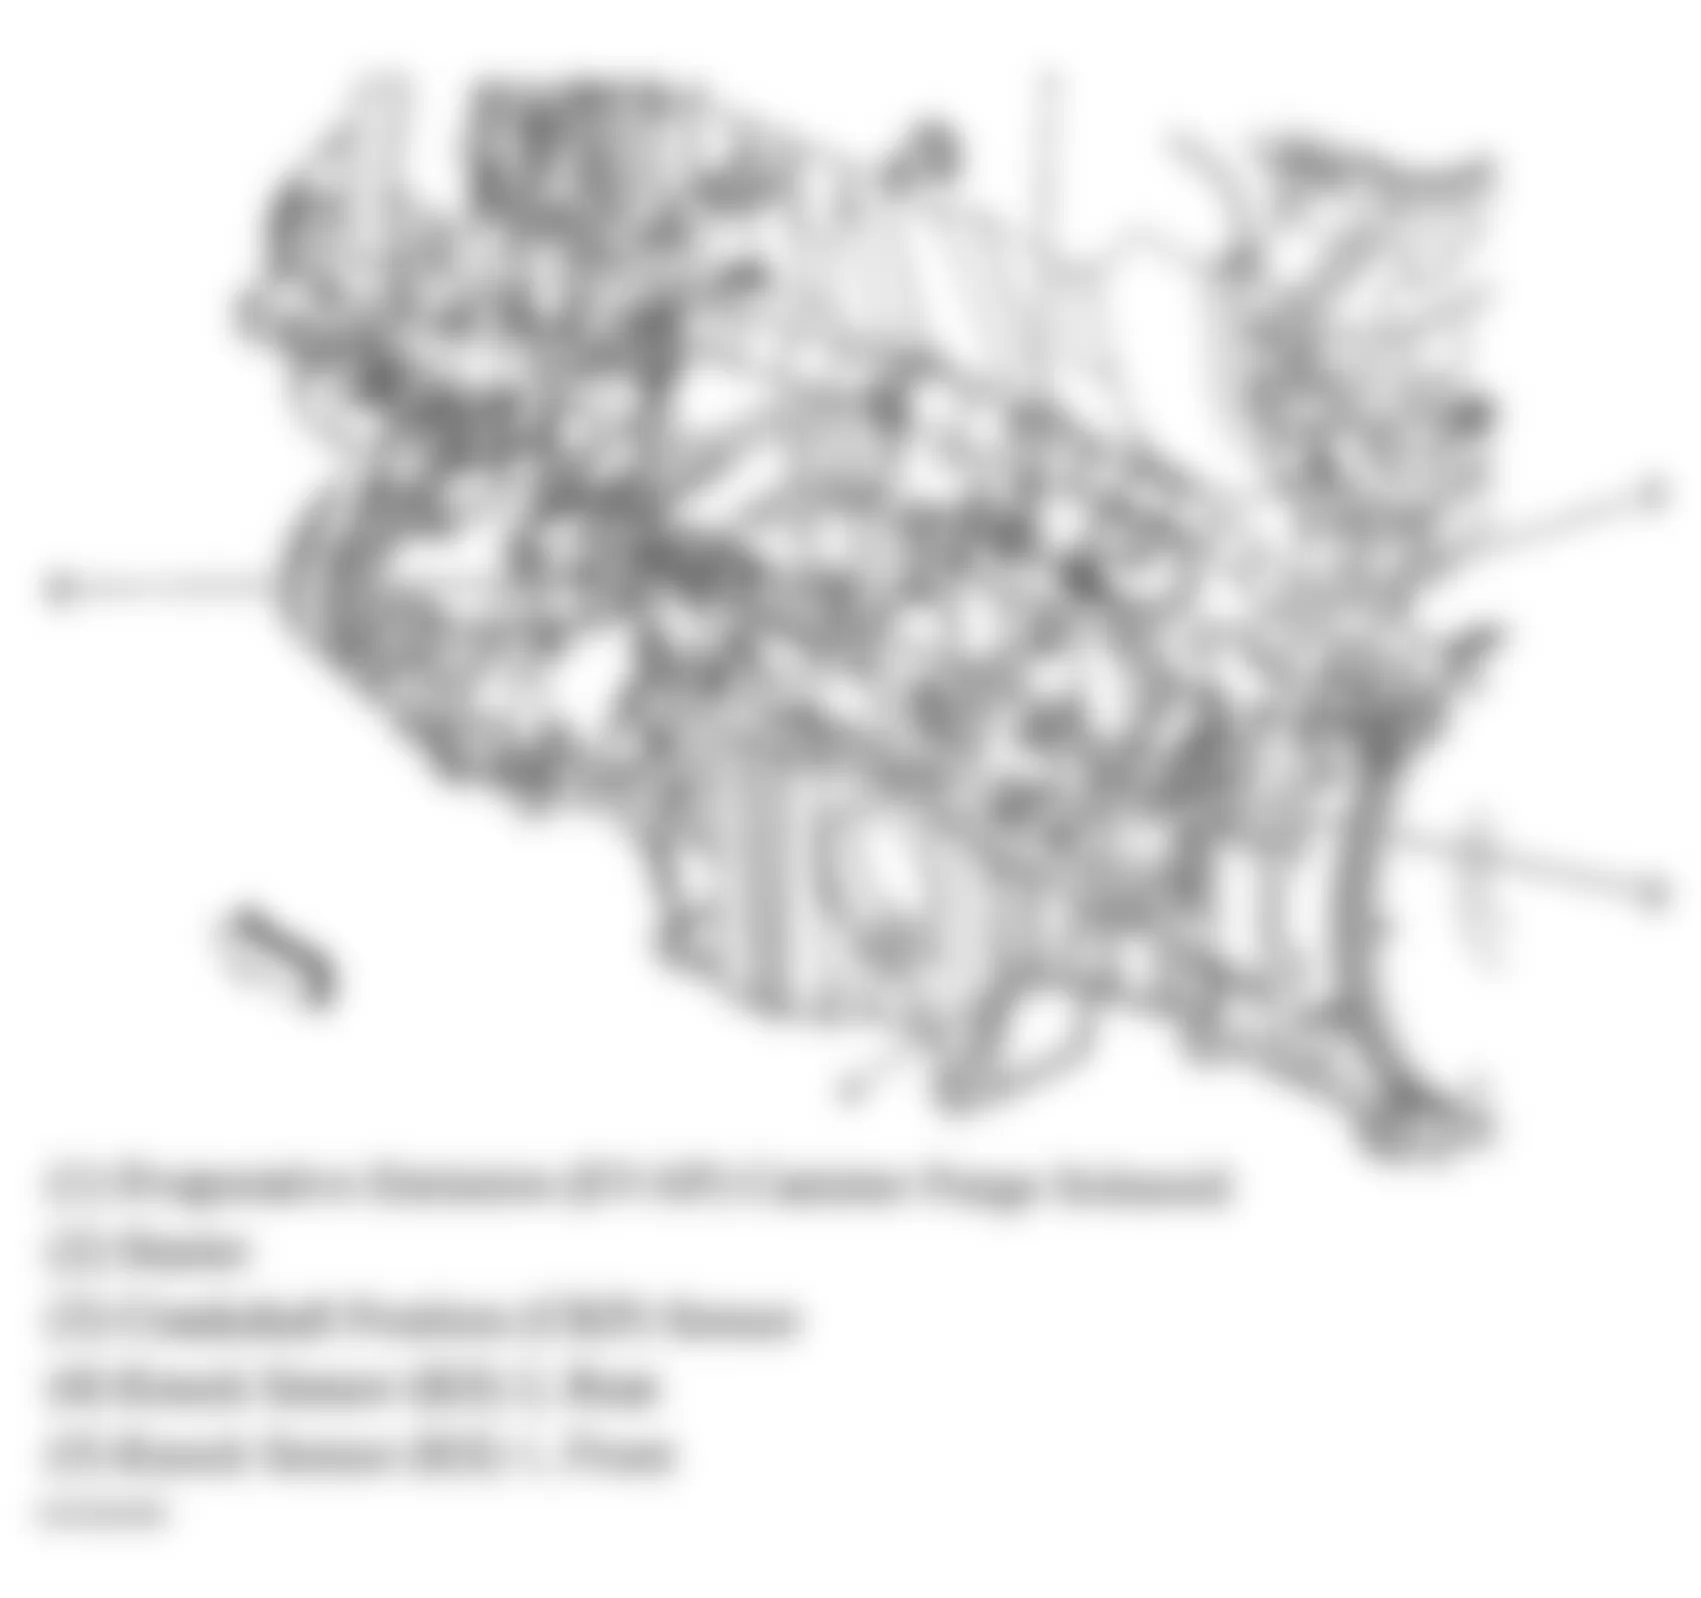 GMC Envoy XL 2006 - Component Locations -  Lower Left Side Of Engine (4.2L)